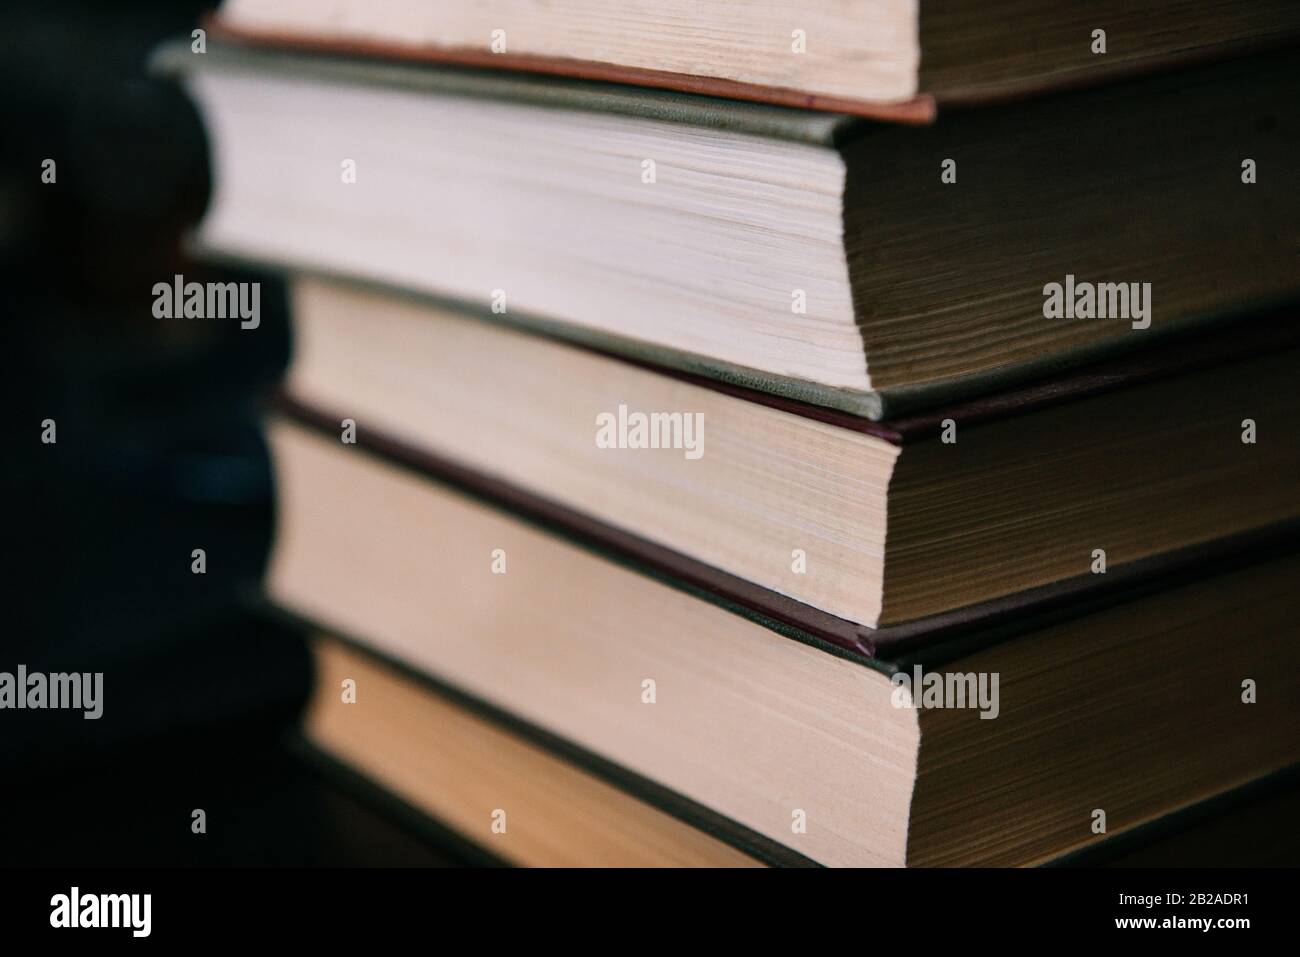 Close-up of a stack of hardback books Stock Photo